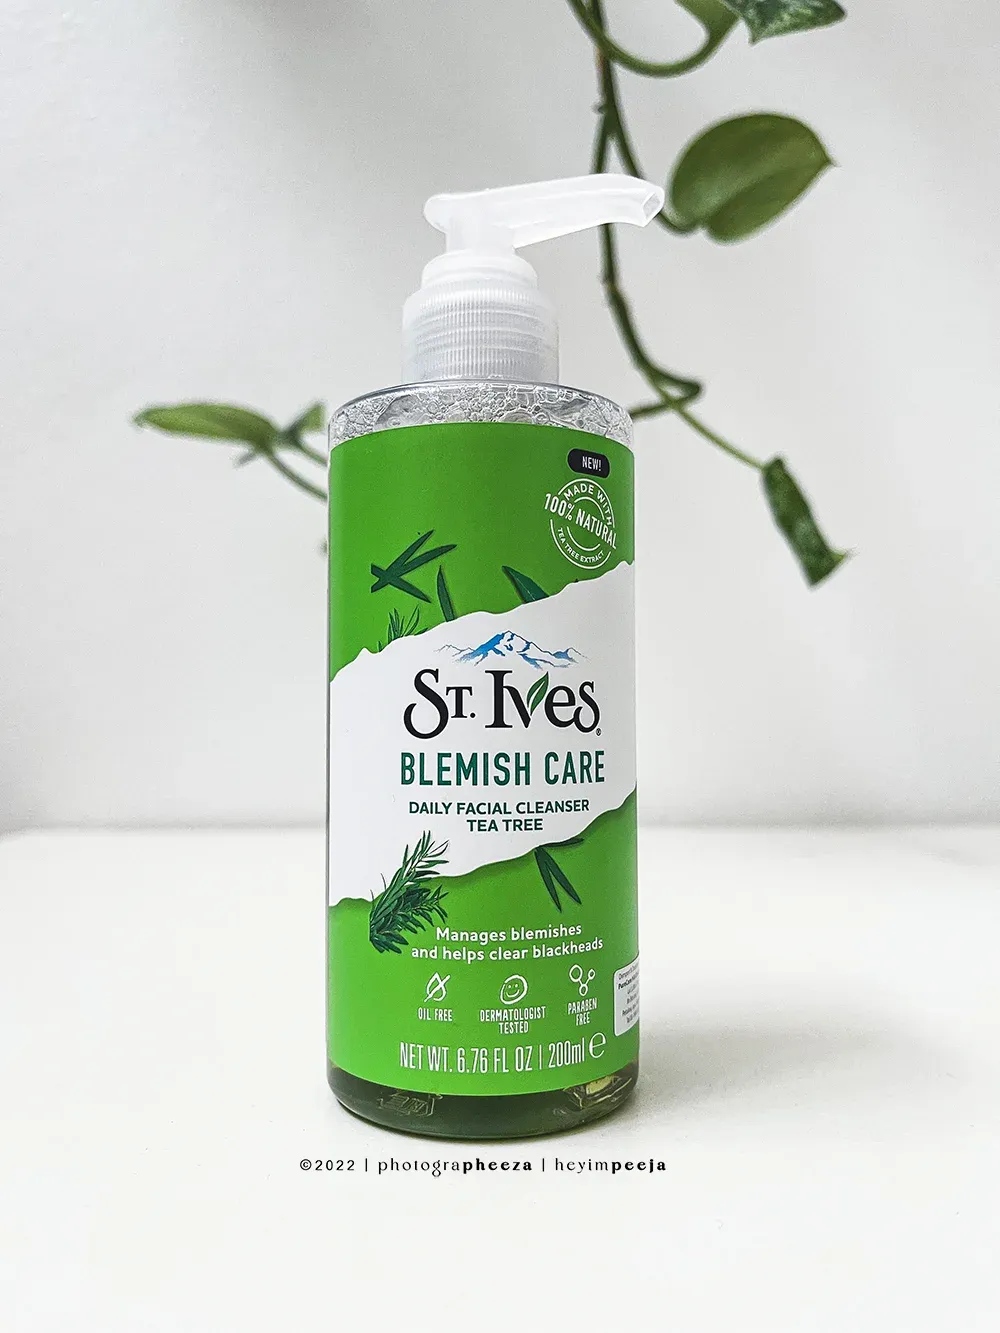 st ives blemish care tea tree face wash review